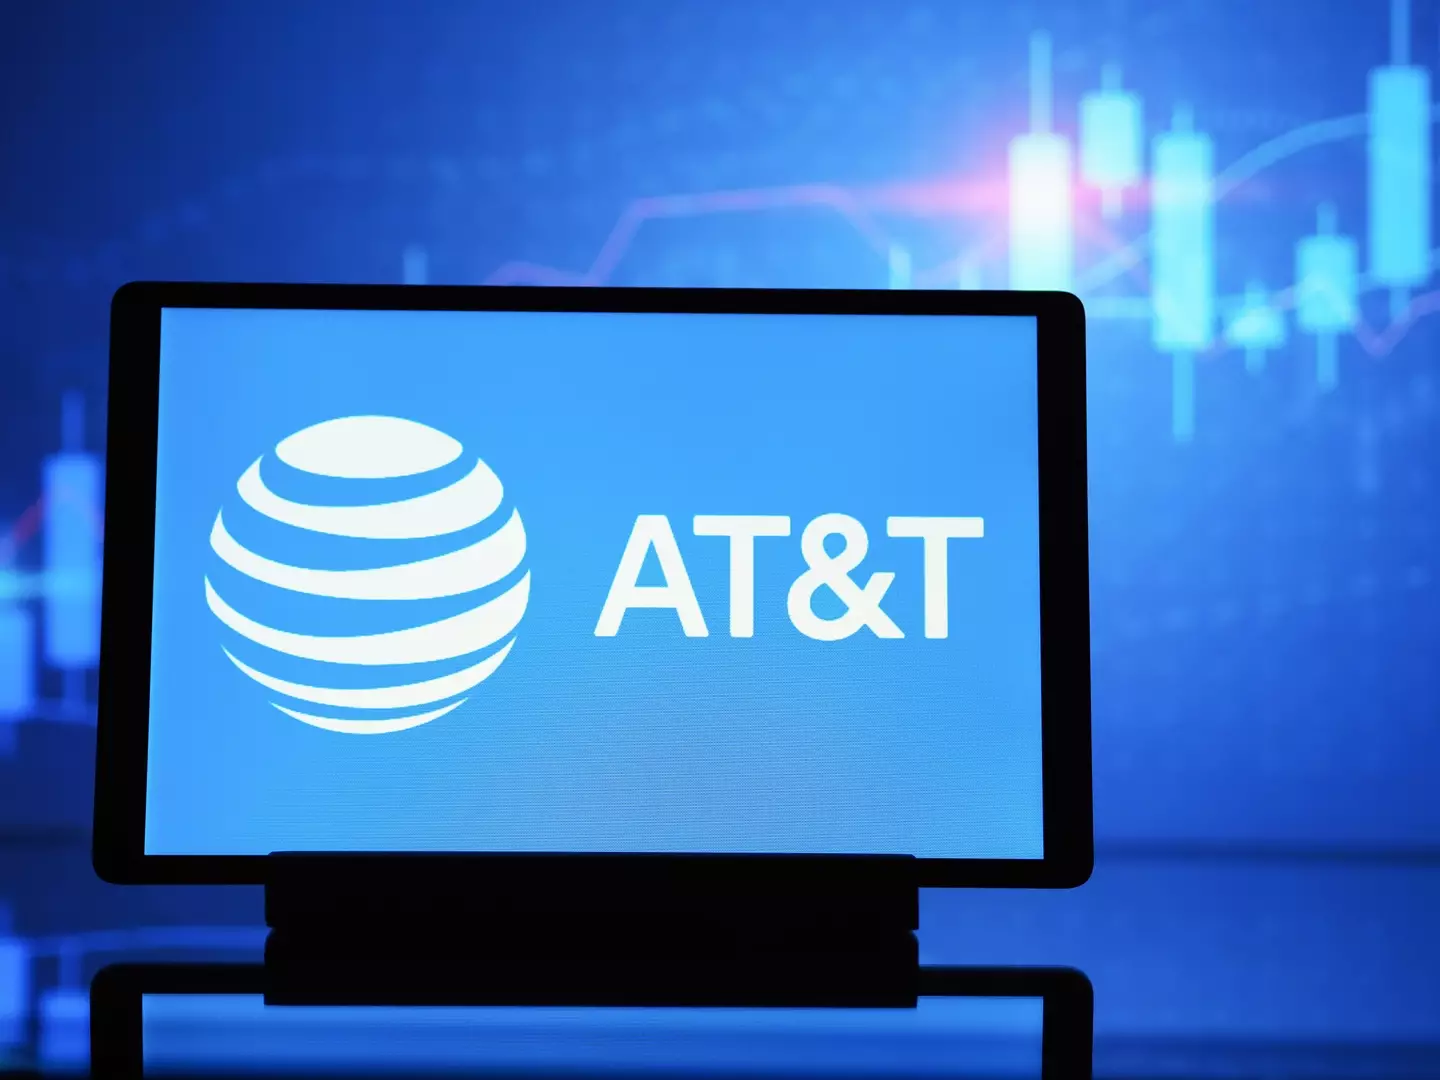 AT&T is offering customers $5 compensation.